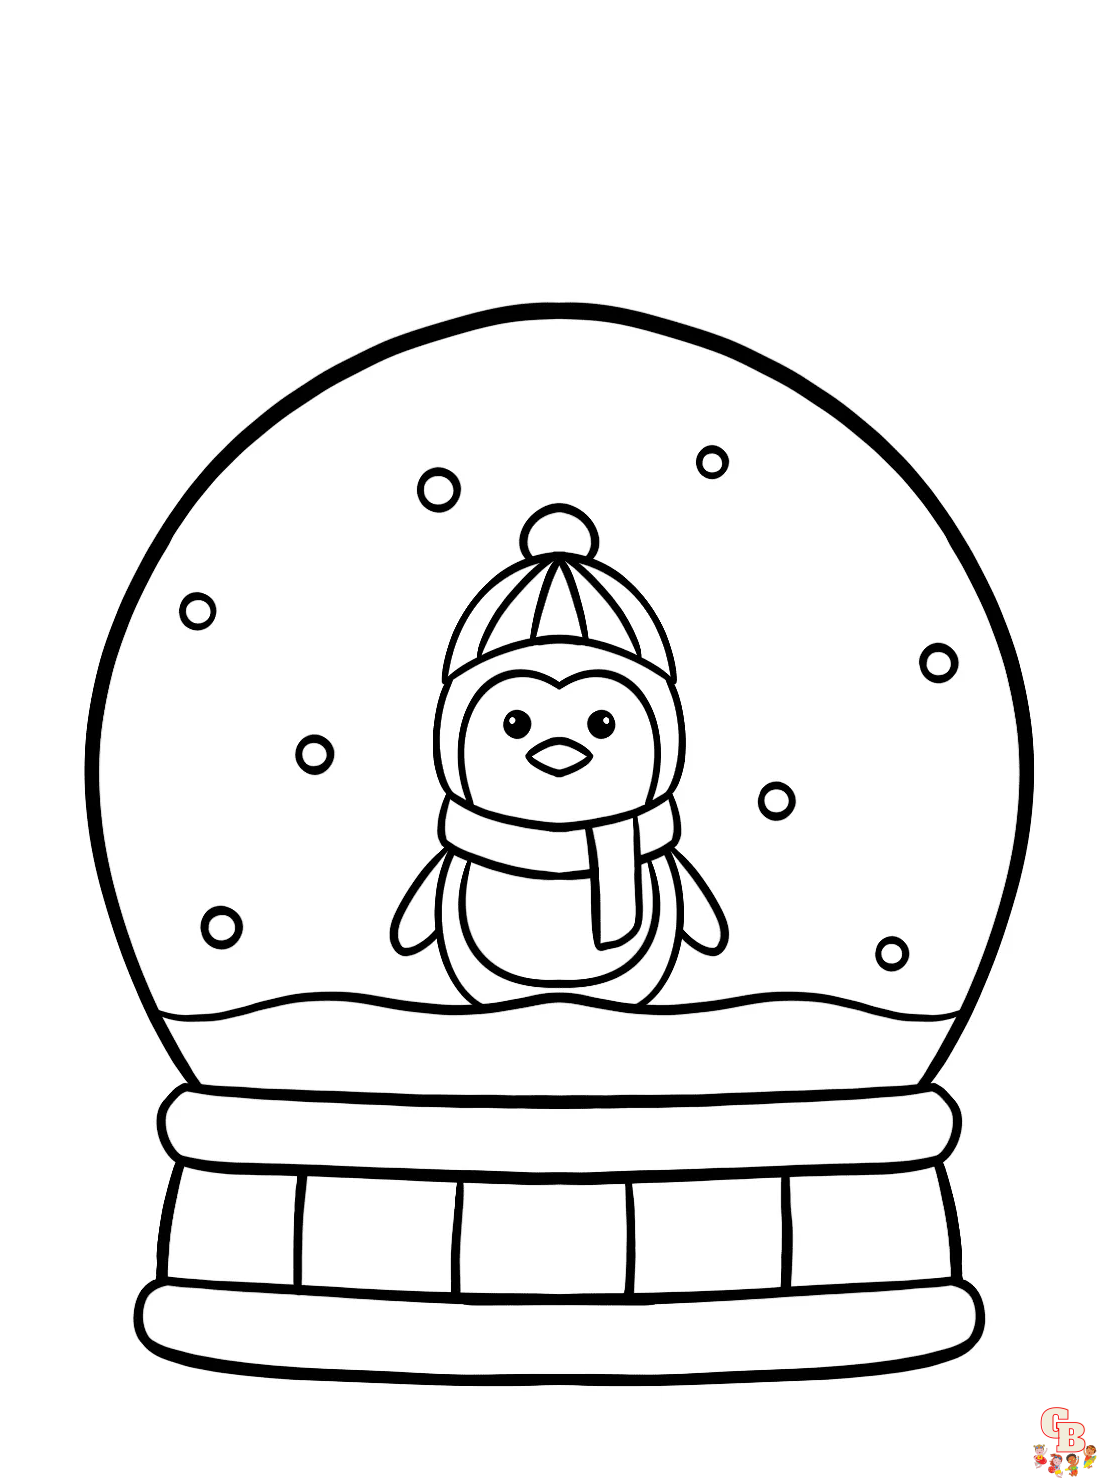 Fun and easy snowglobe coloring pages for kids free printable